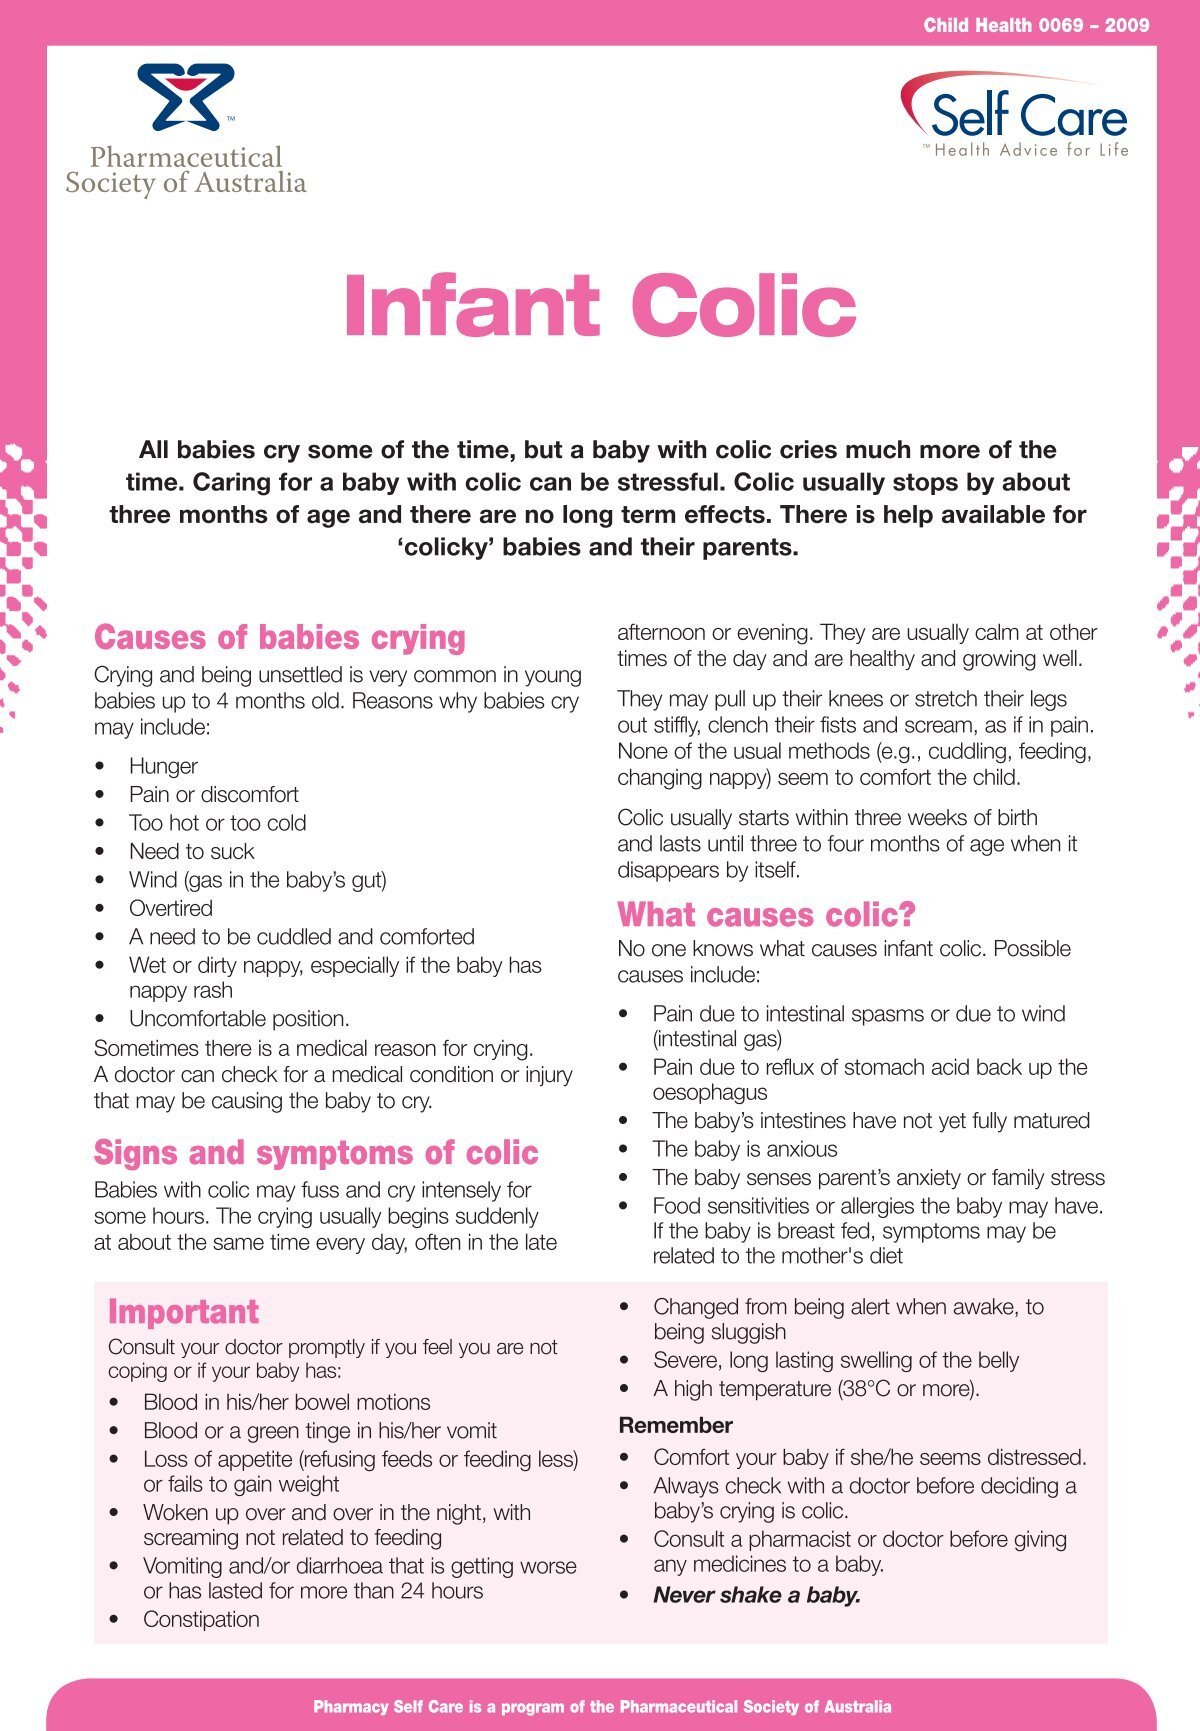 colic ends at what age